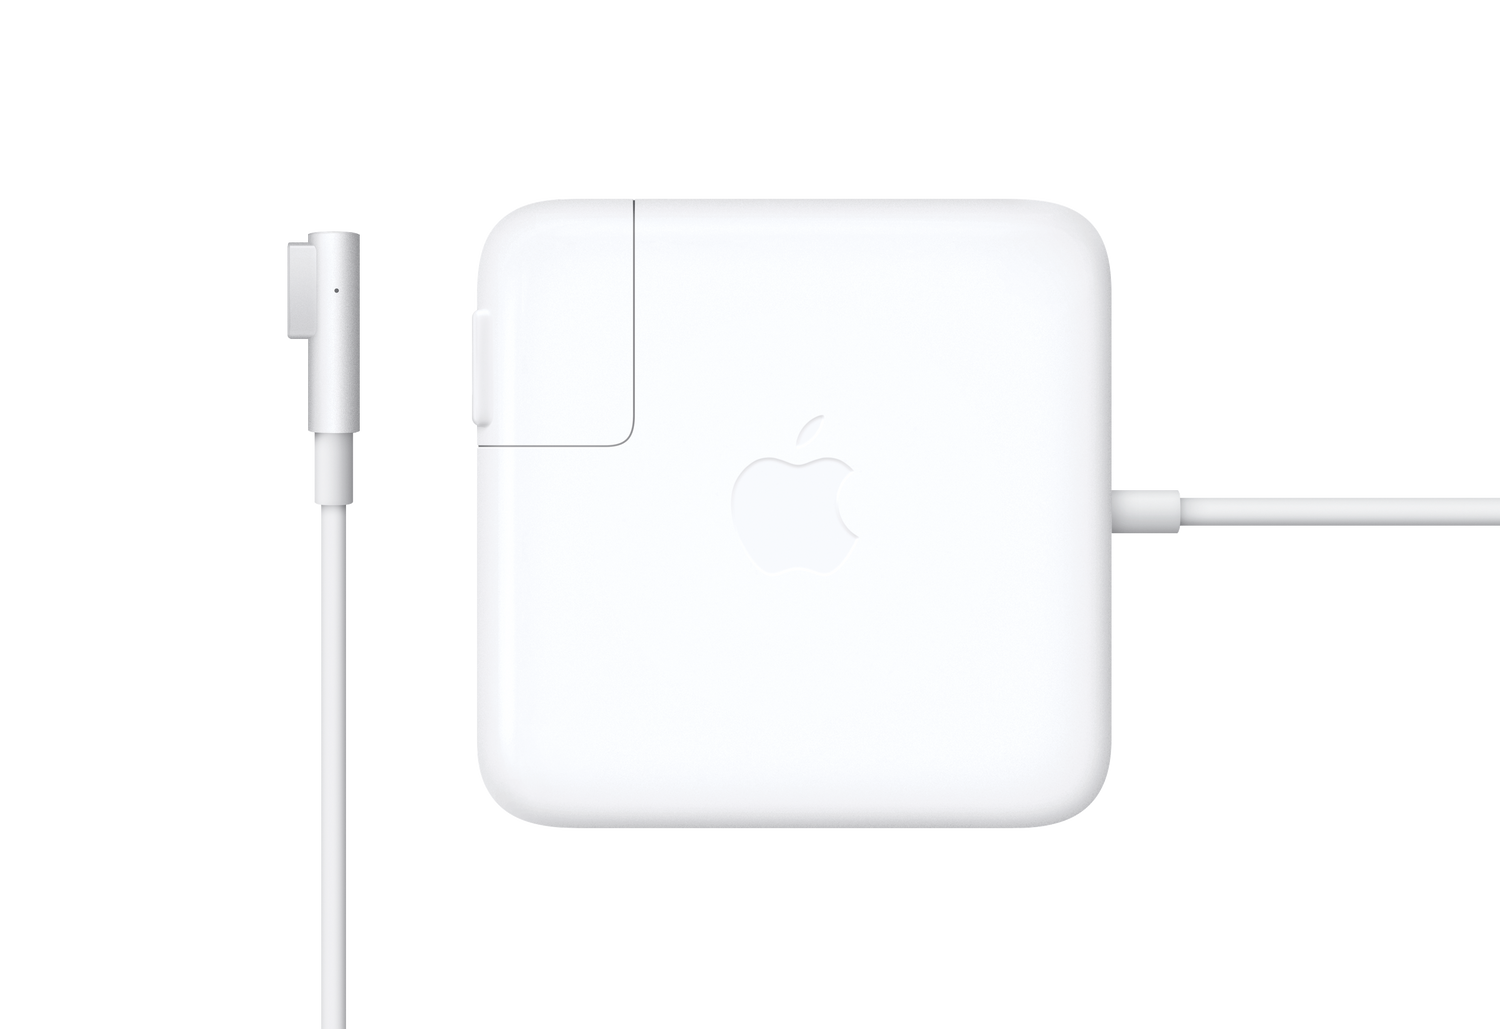 Apple 60W MagSafe Power Adapter for MacBook and 13-inch MacBook Pro